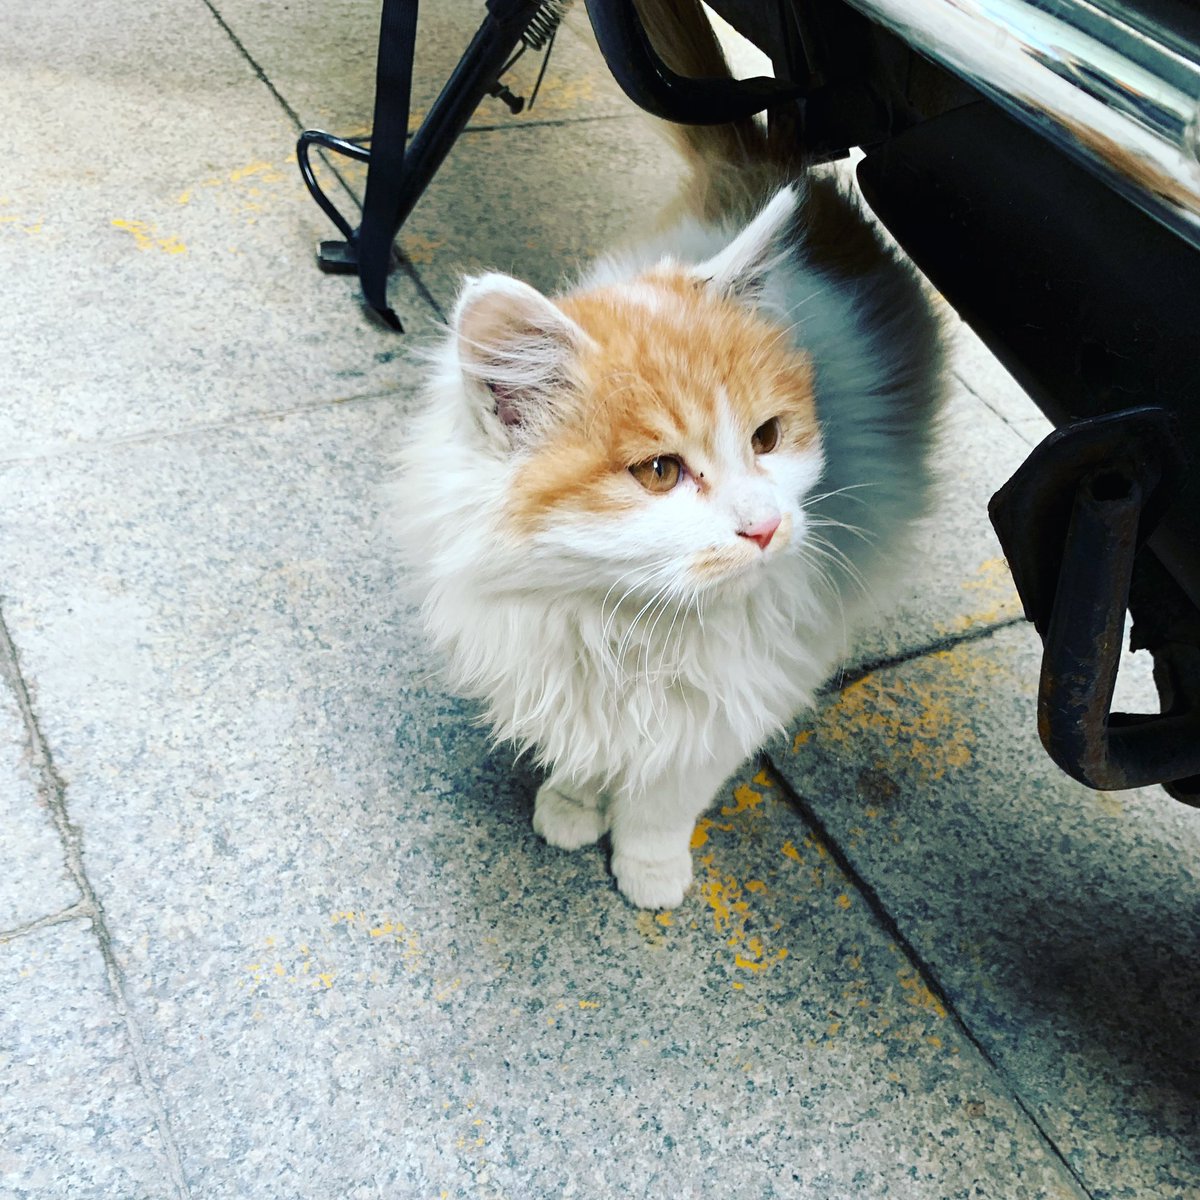 A cat at a hotel in Beijing.  We seem to have been blessed with cats until the end.

#tokyoshoegazer  #東京酒吐座 #shoegazer #shoegaze #shoegazemusic #shoegazeband #delay #reverb #indieband #indierock #rock #シューゲイザー #altanative #altanativerock #postrock #北京 #Beijing